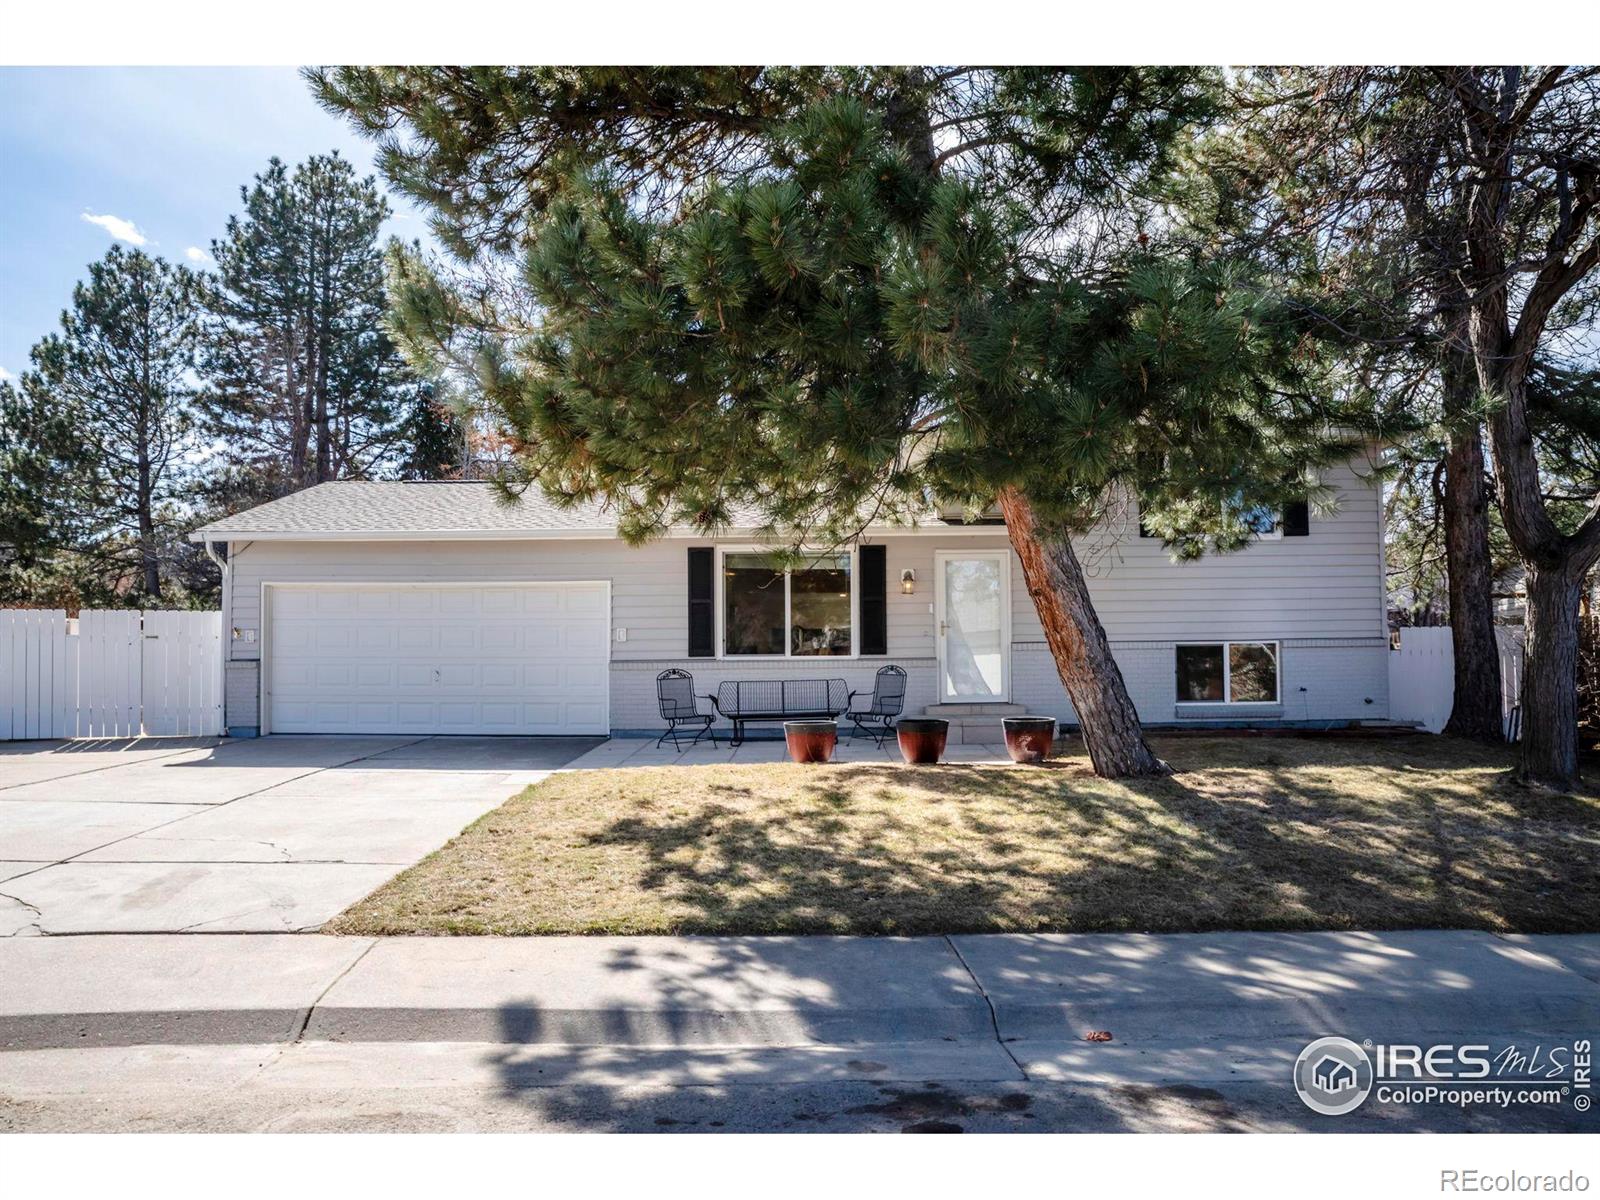 Report Image for 234  Short Place,Louisville, Colorado